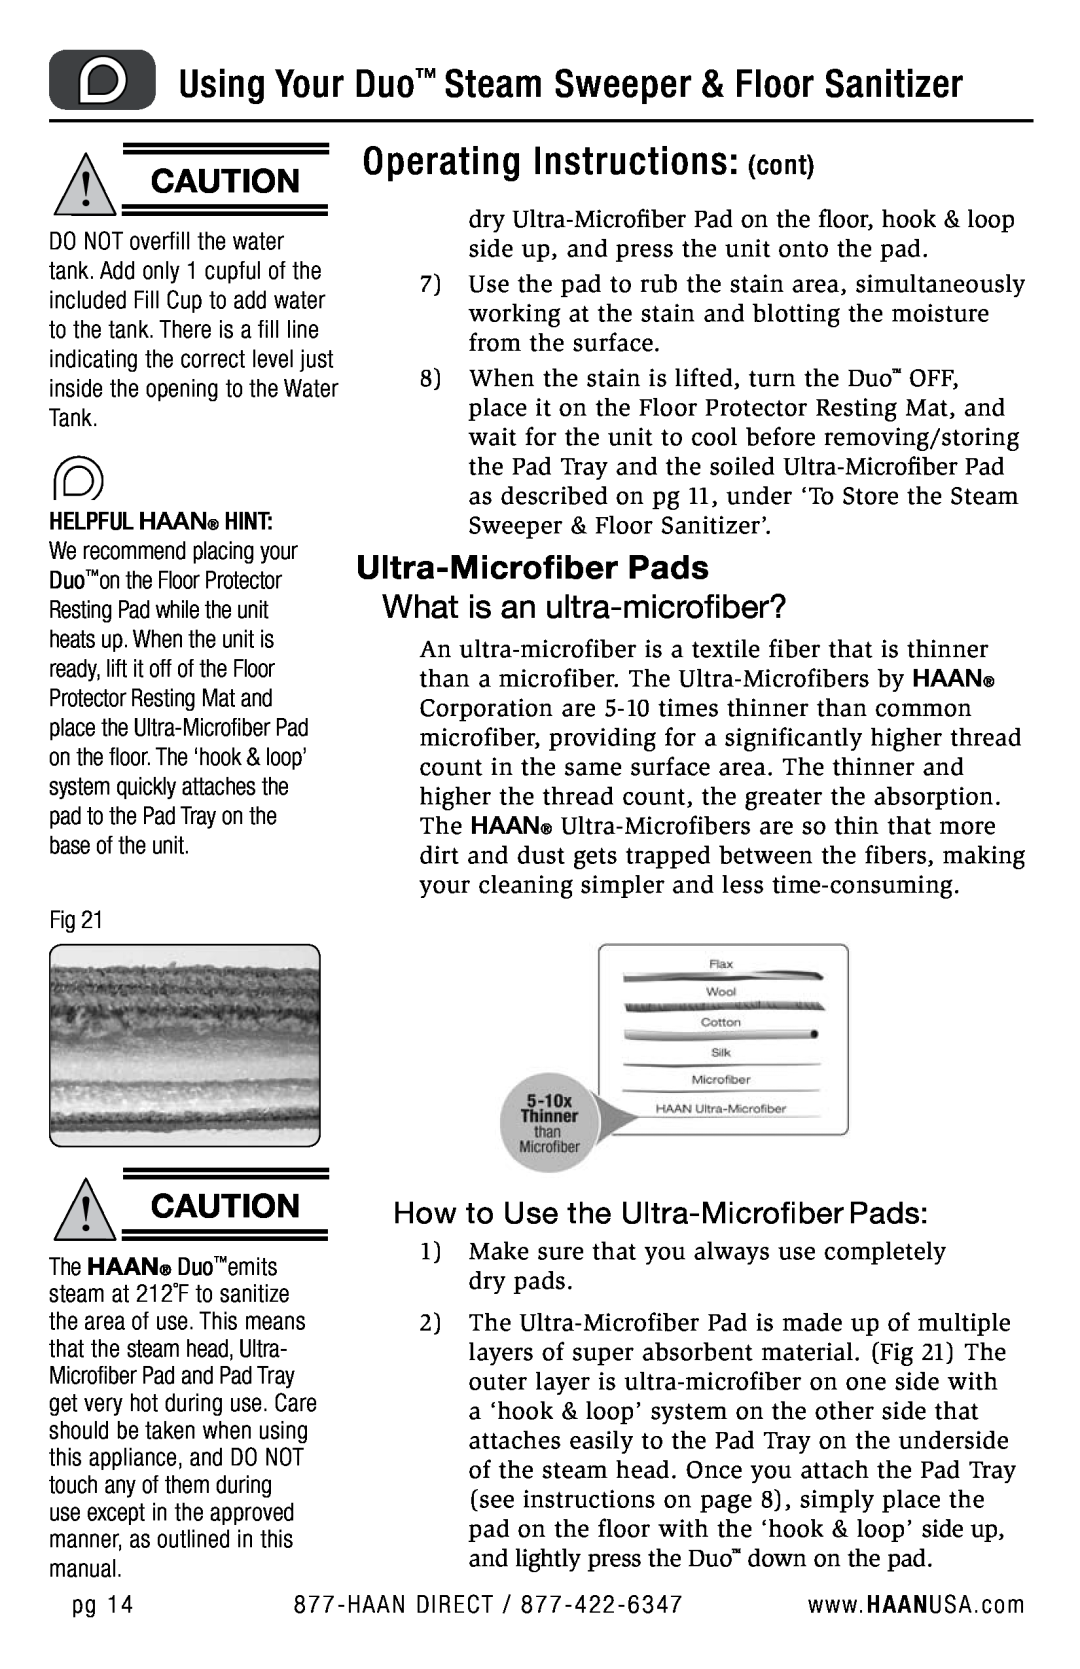 Haan HD-50 user manual Ultra-MicrofiberPads, Using Your Duo Steam Sweeper & Floor Sanitizer, Operating Instructions cont 